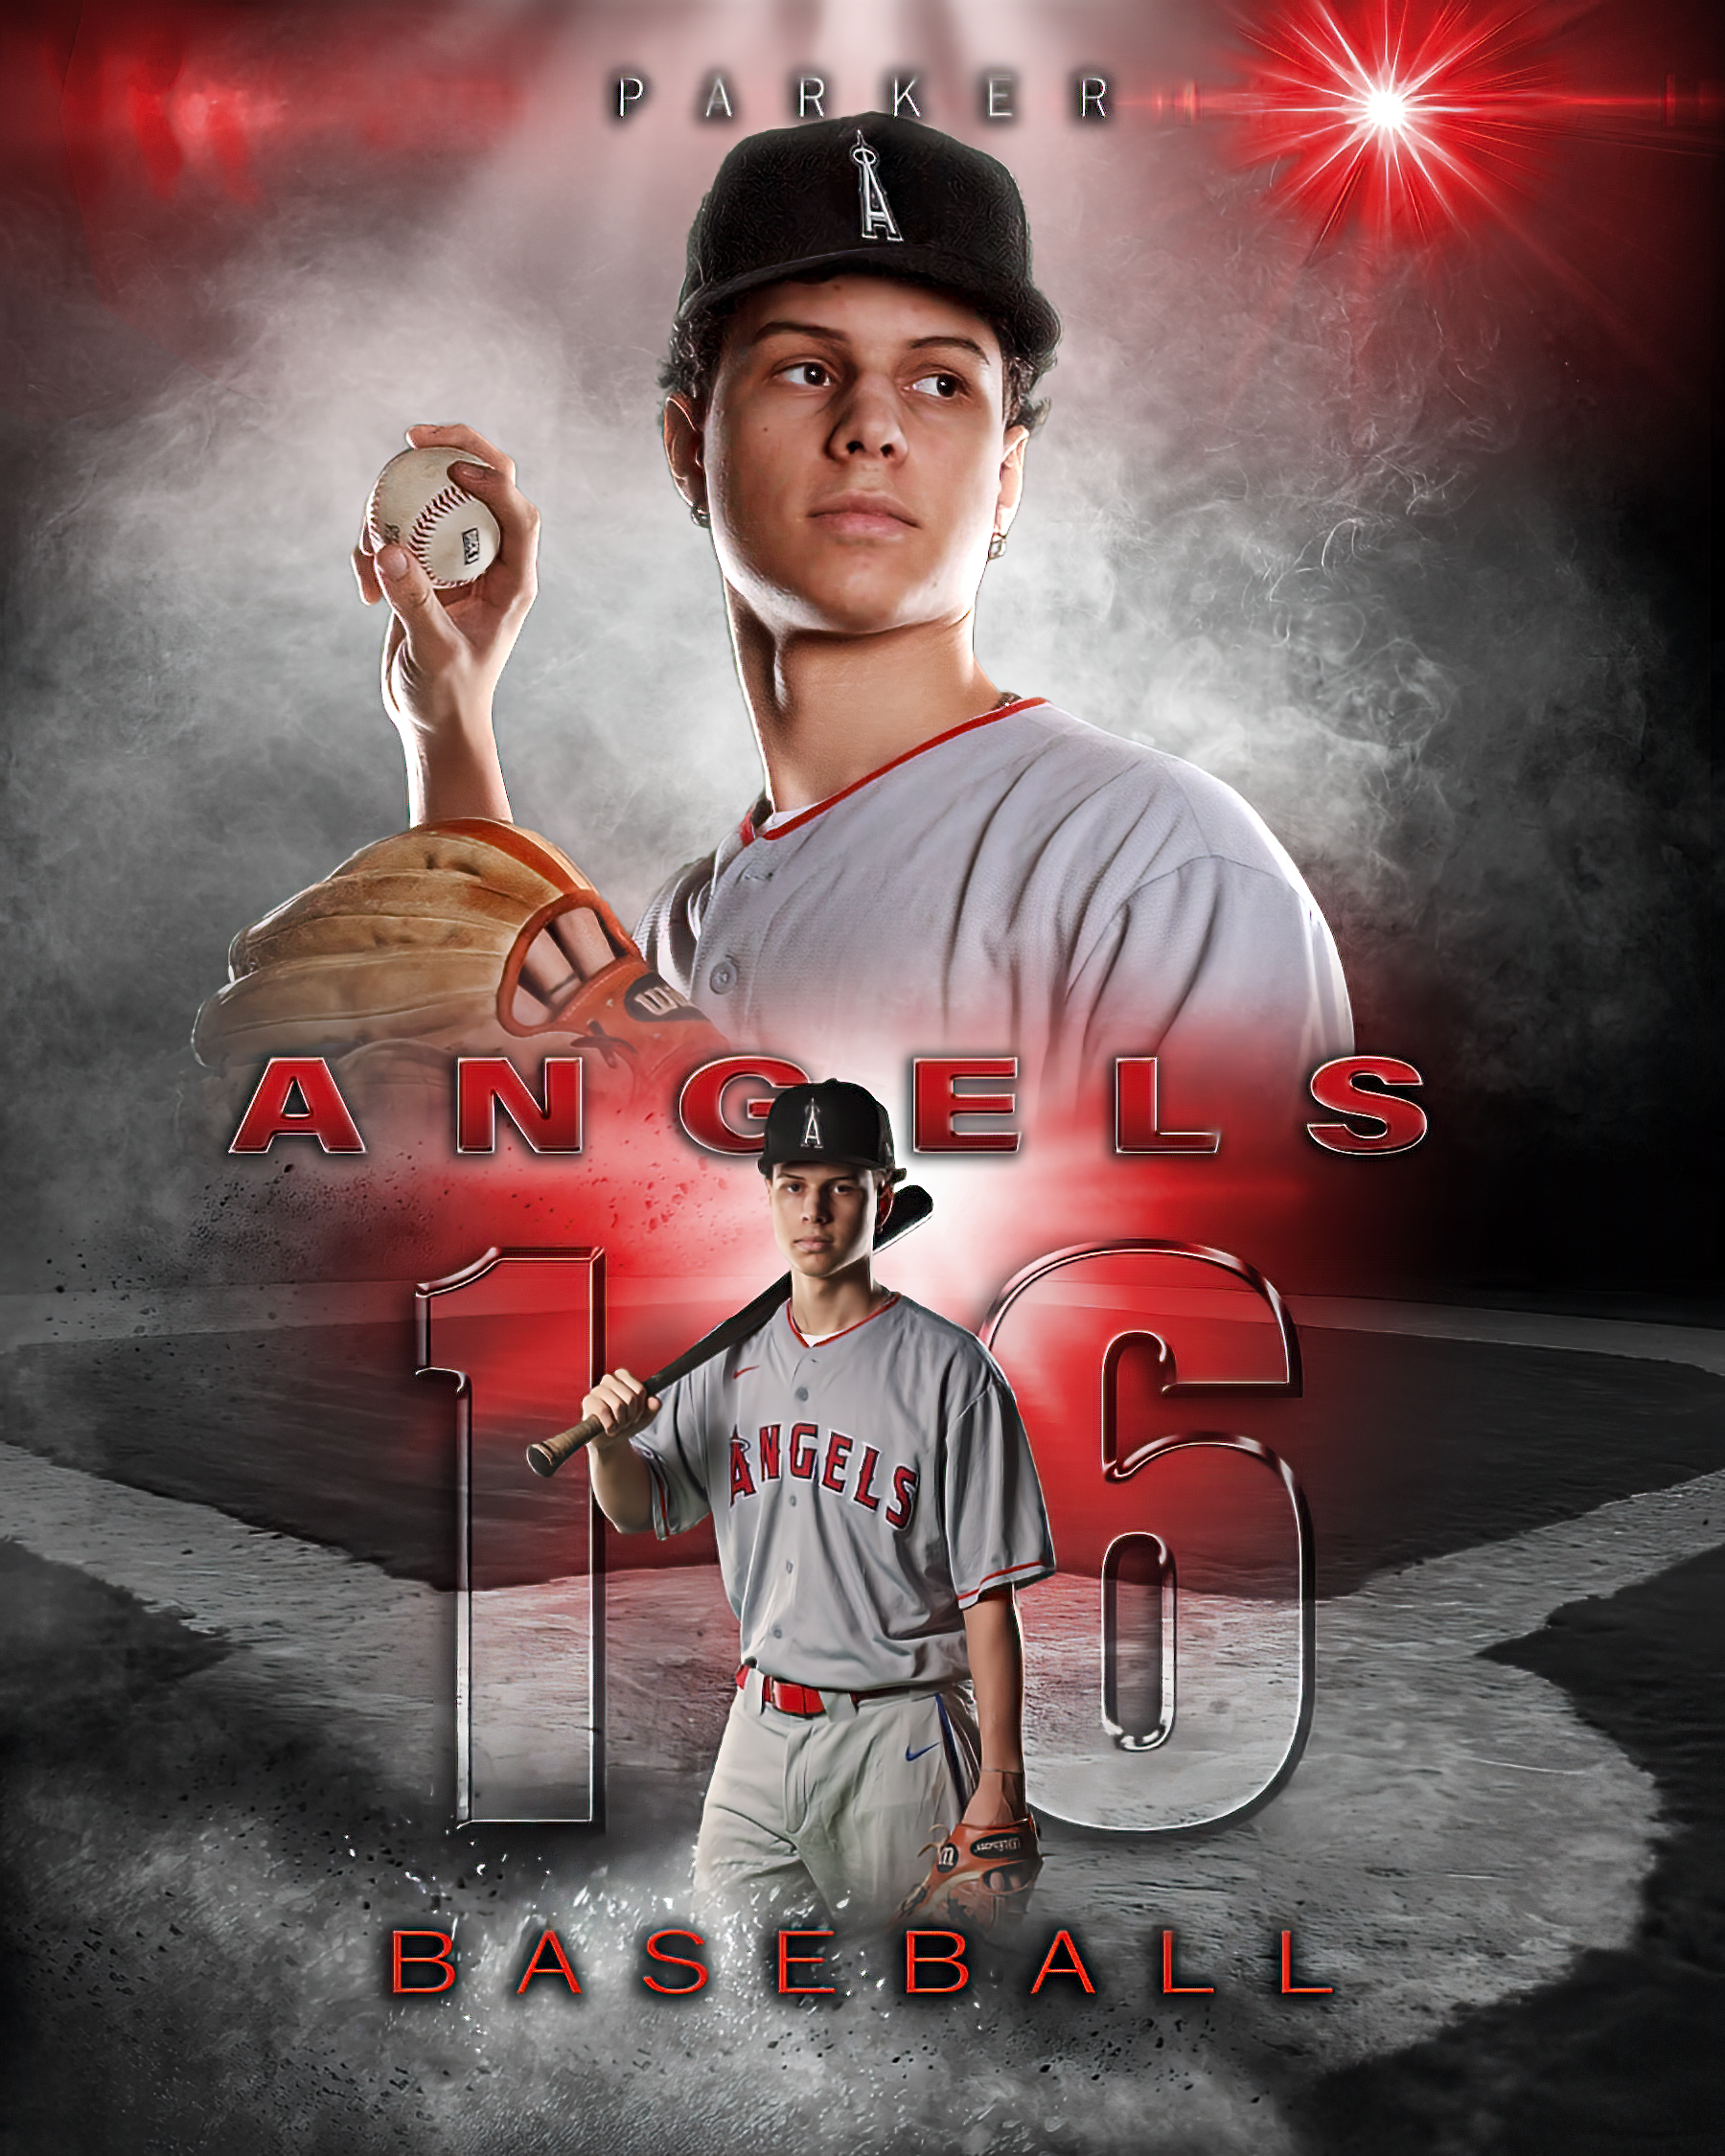 An example of a sports portrait featuring a teenage baseball player